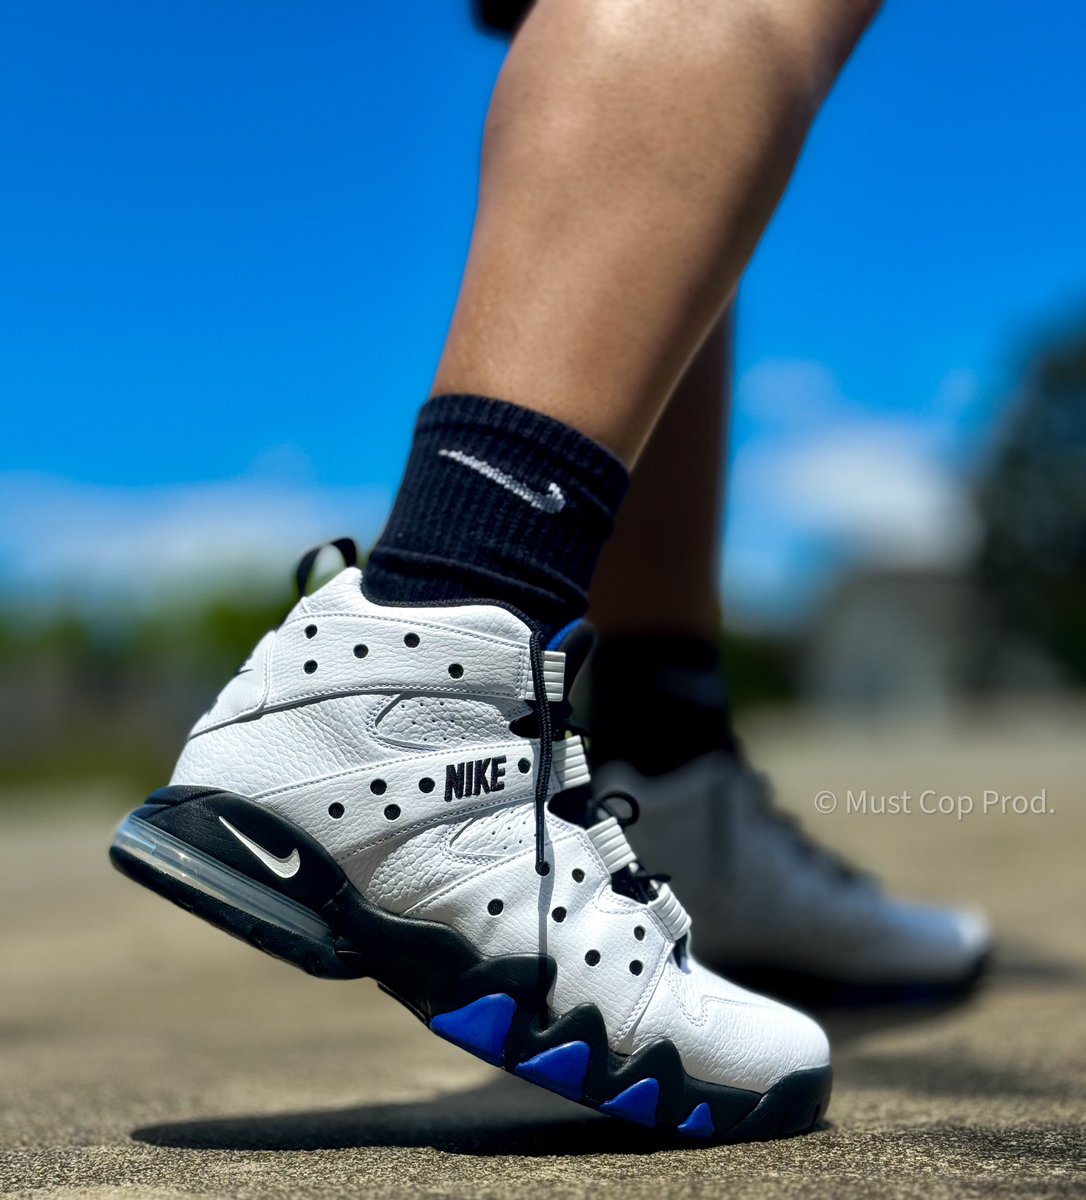 Sneaker culture for me is and always will be cop and rock what you like you heard‼️🗣️ #KOTD Nike Air Max2 CB 94 Royal /White #kotd #nike #wearyoursneakers #enjoylife #OGlove #snkrsliveheatingup #everythingiseasy